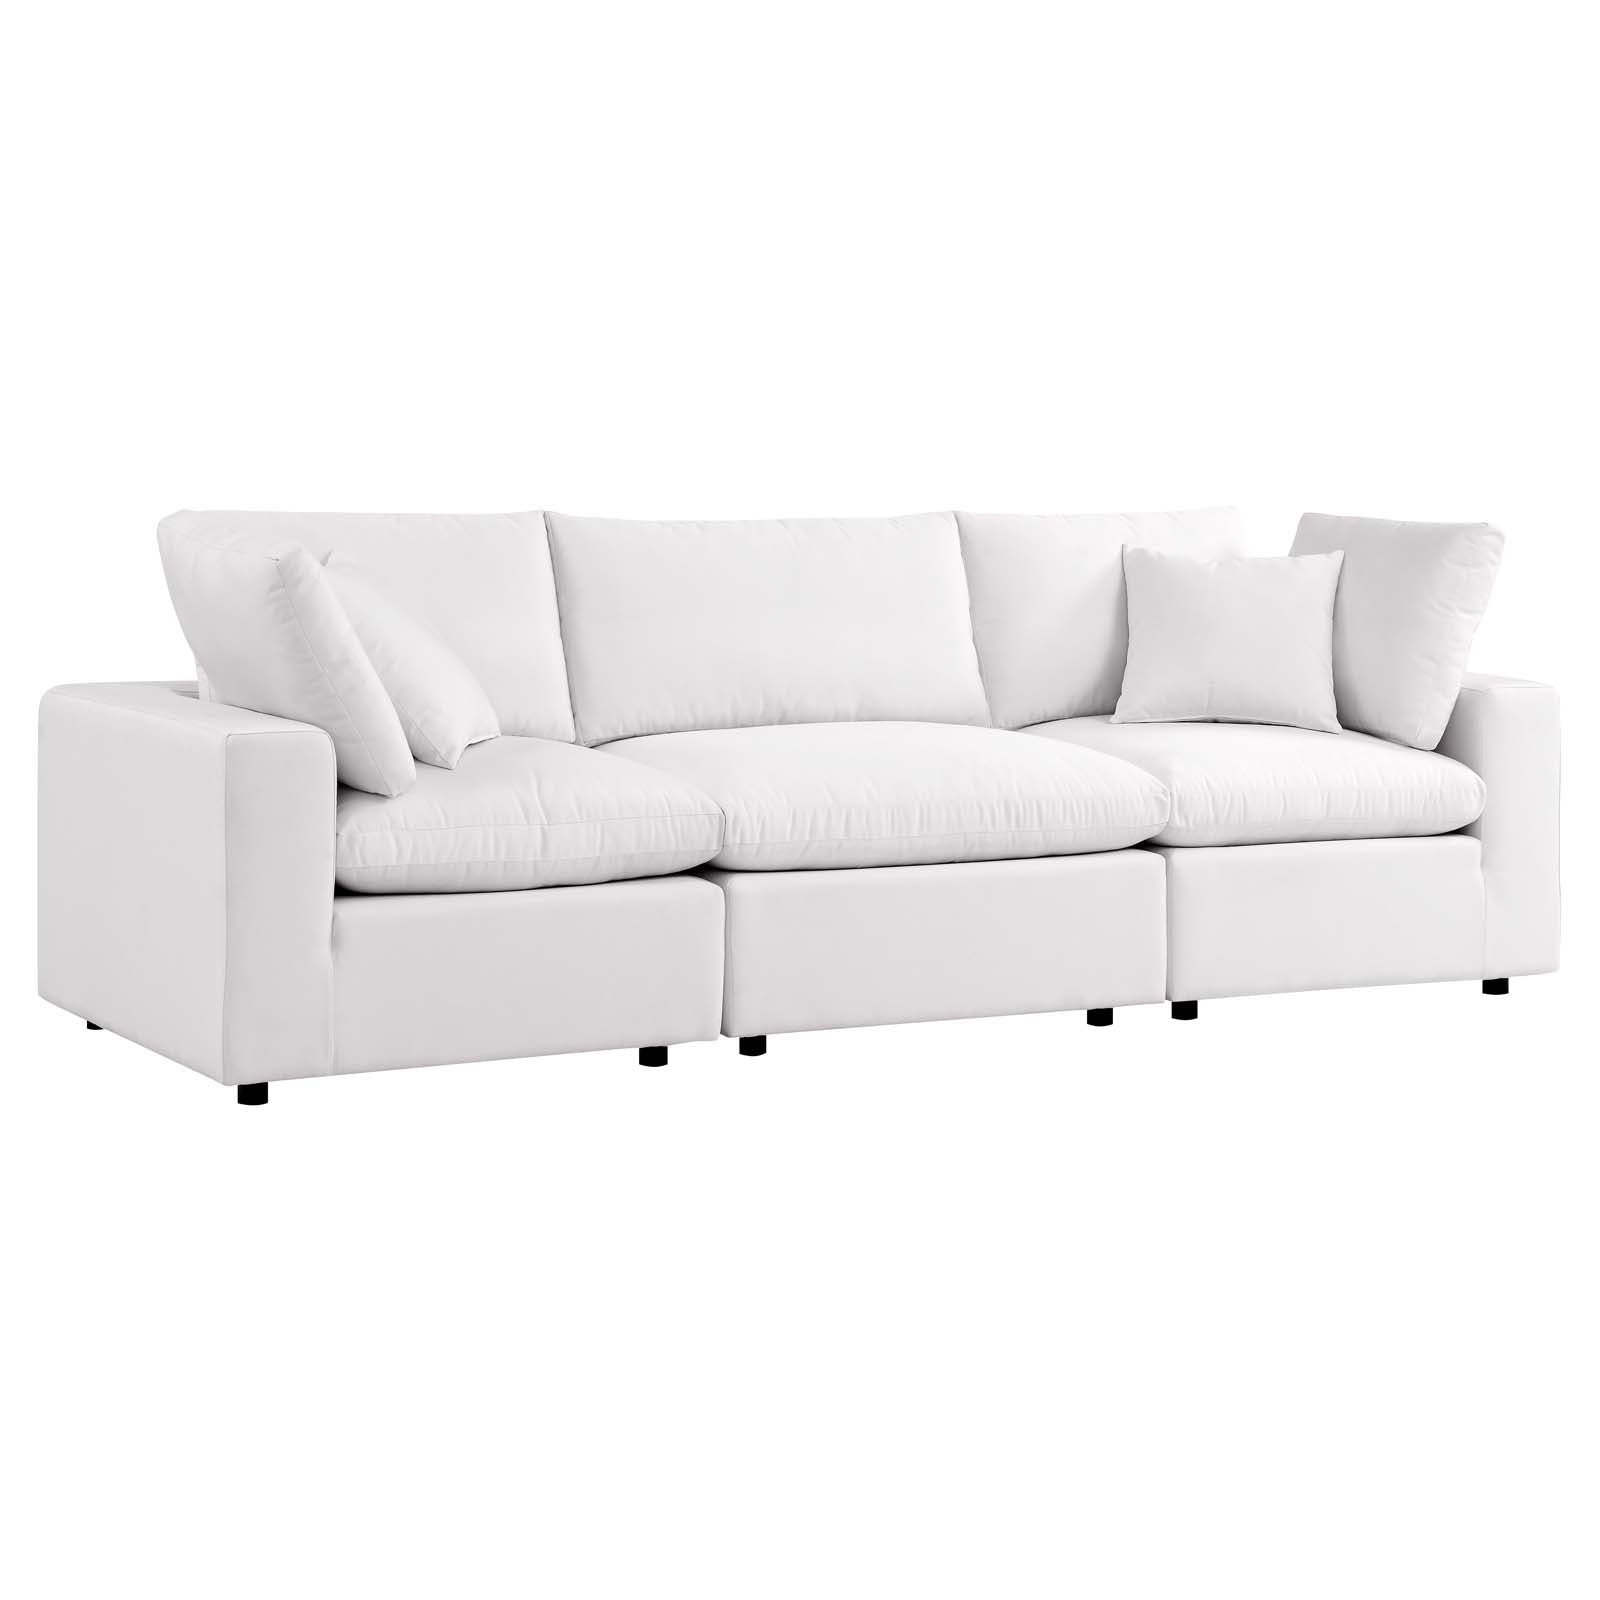 Modway Outdoor Sofas - Commix Overstuffed Outdoor Patio Sofa White